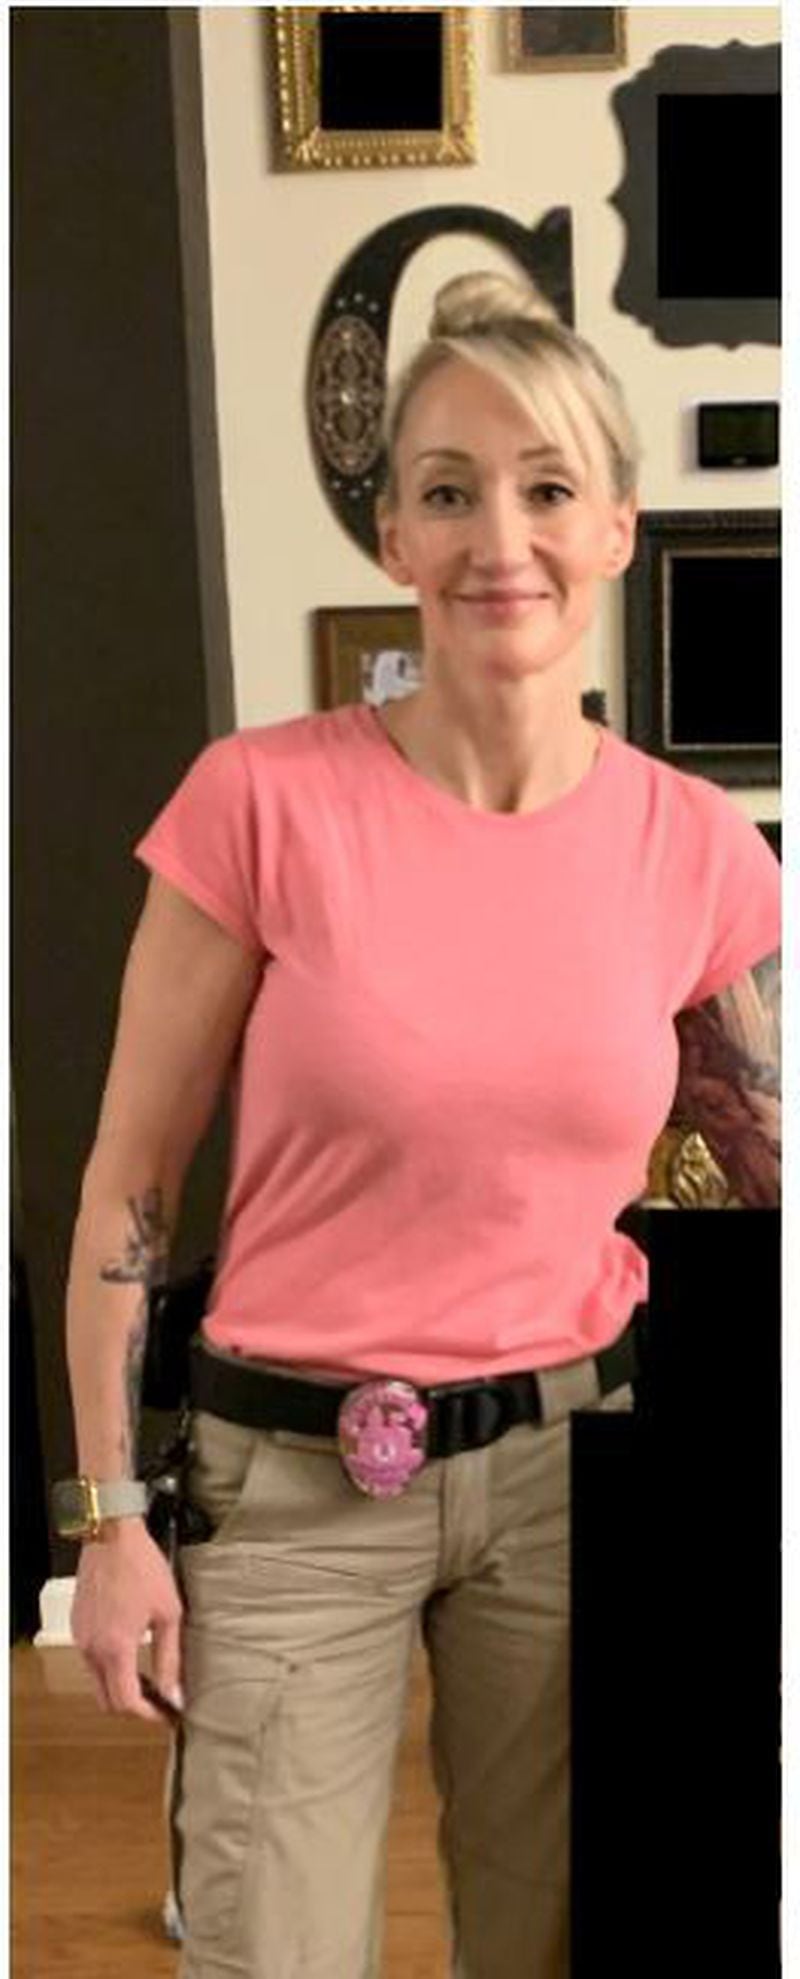 Former Lawrenceville Police Chief Tim Wallis told the Gilovanni she looked like she worked at Hooters when she wore a pink t-shirt on a day the air conditioning went out at headquarters.